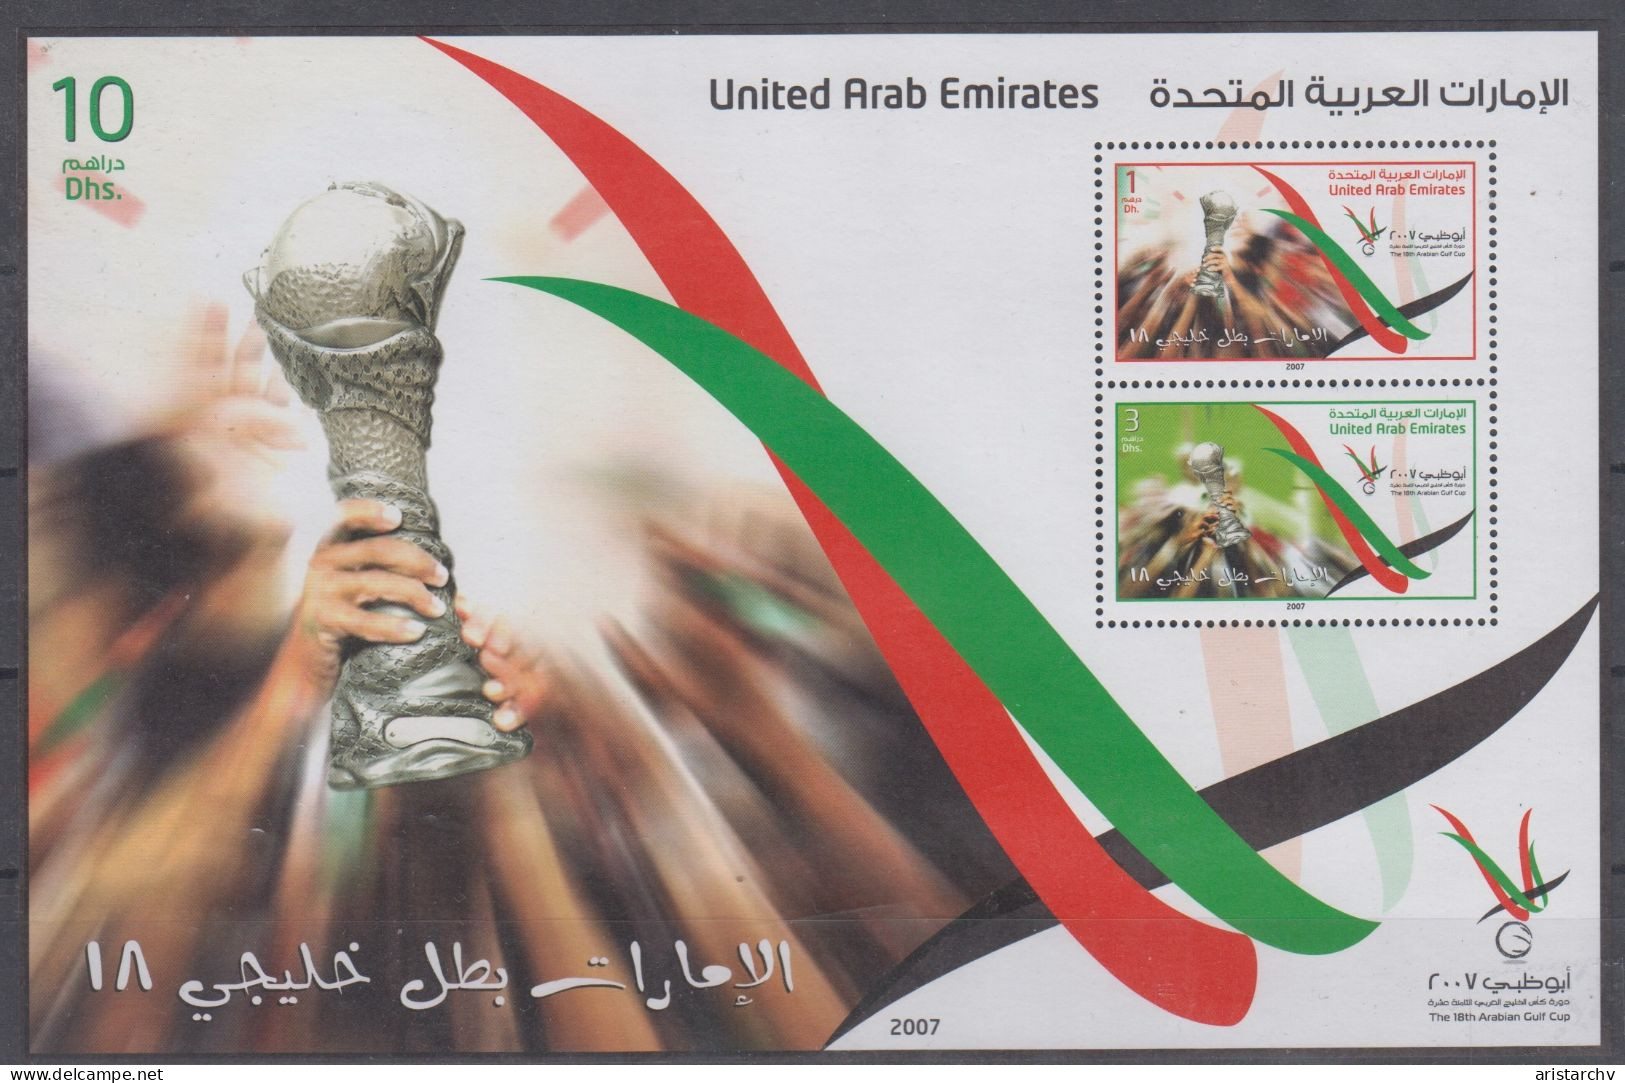 UAE 2007 FOOTBALL ARABIAN GULF CUP S/SHEET AND 2 STAMPS - Copa Asiática (AFC)